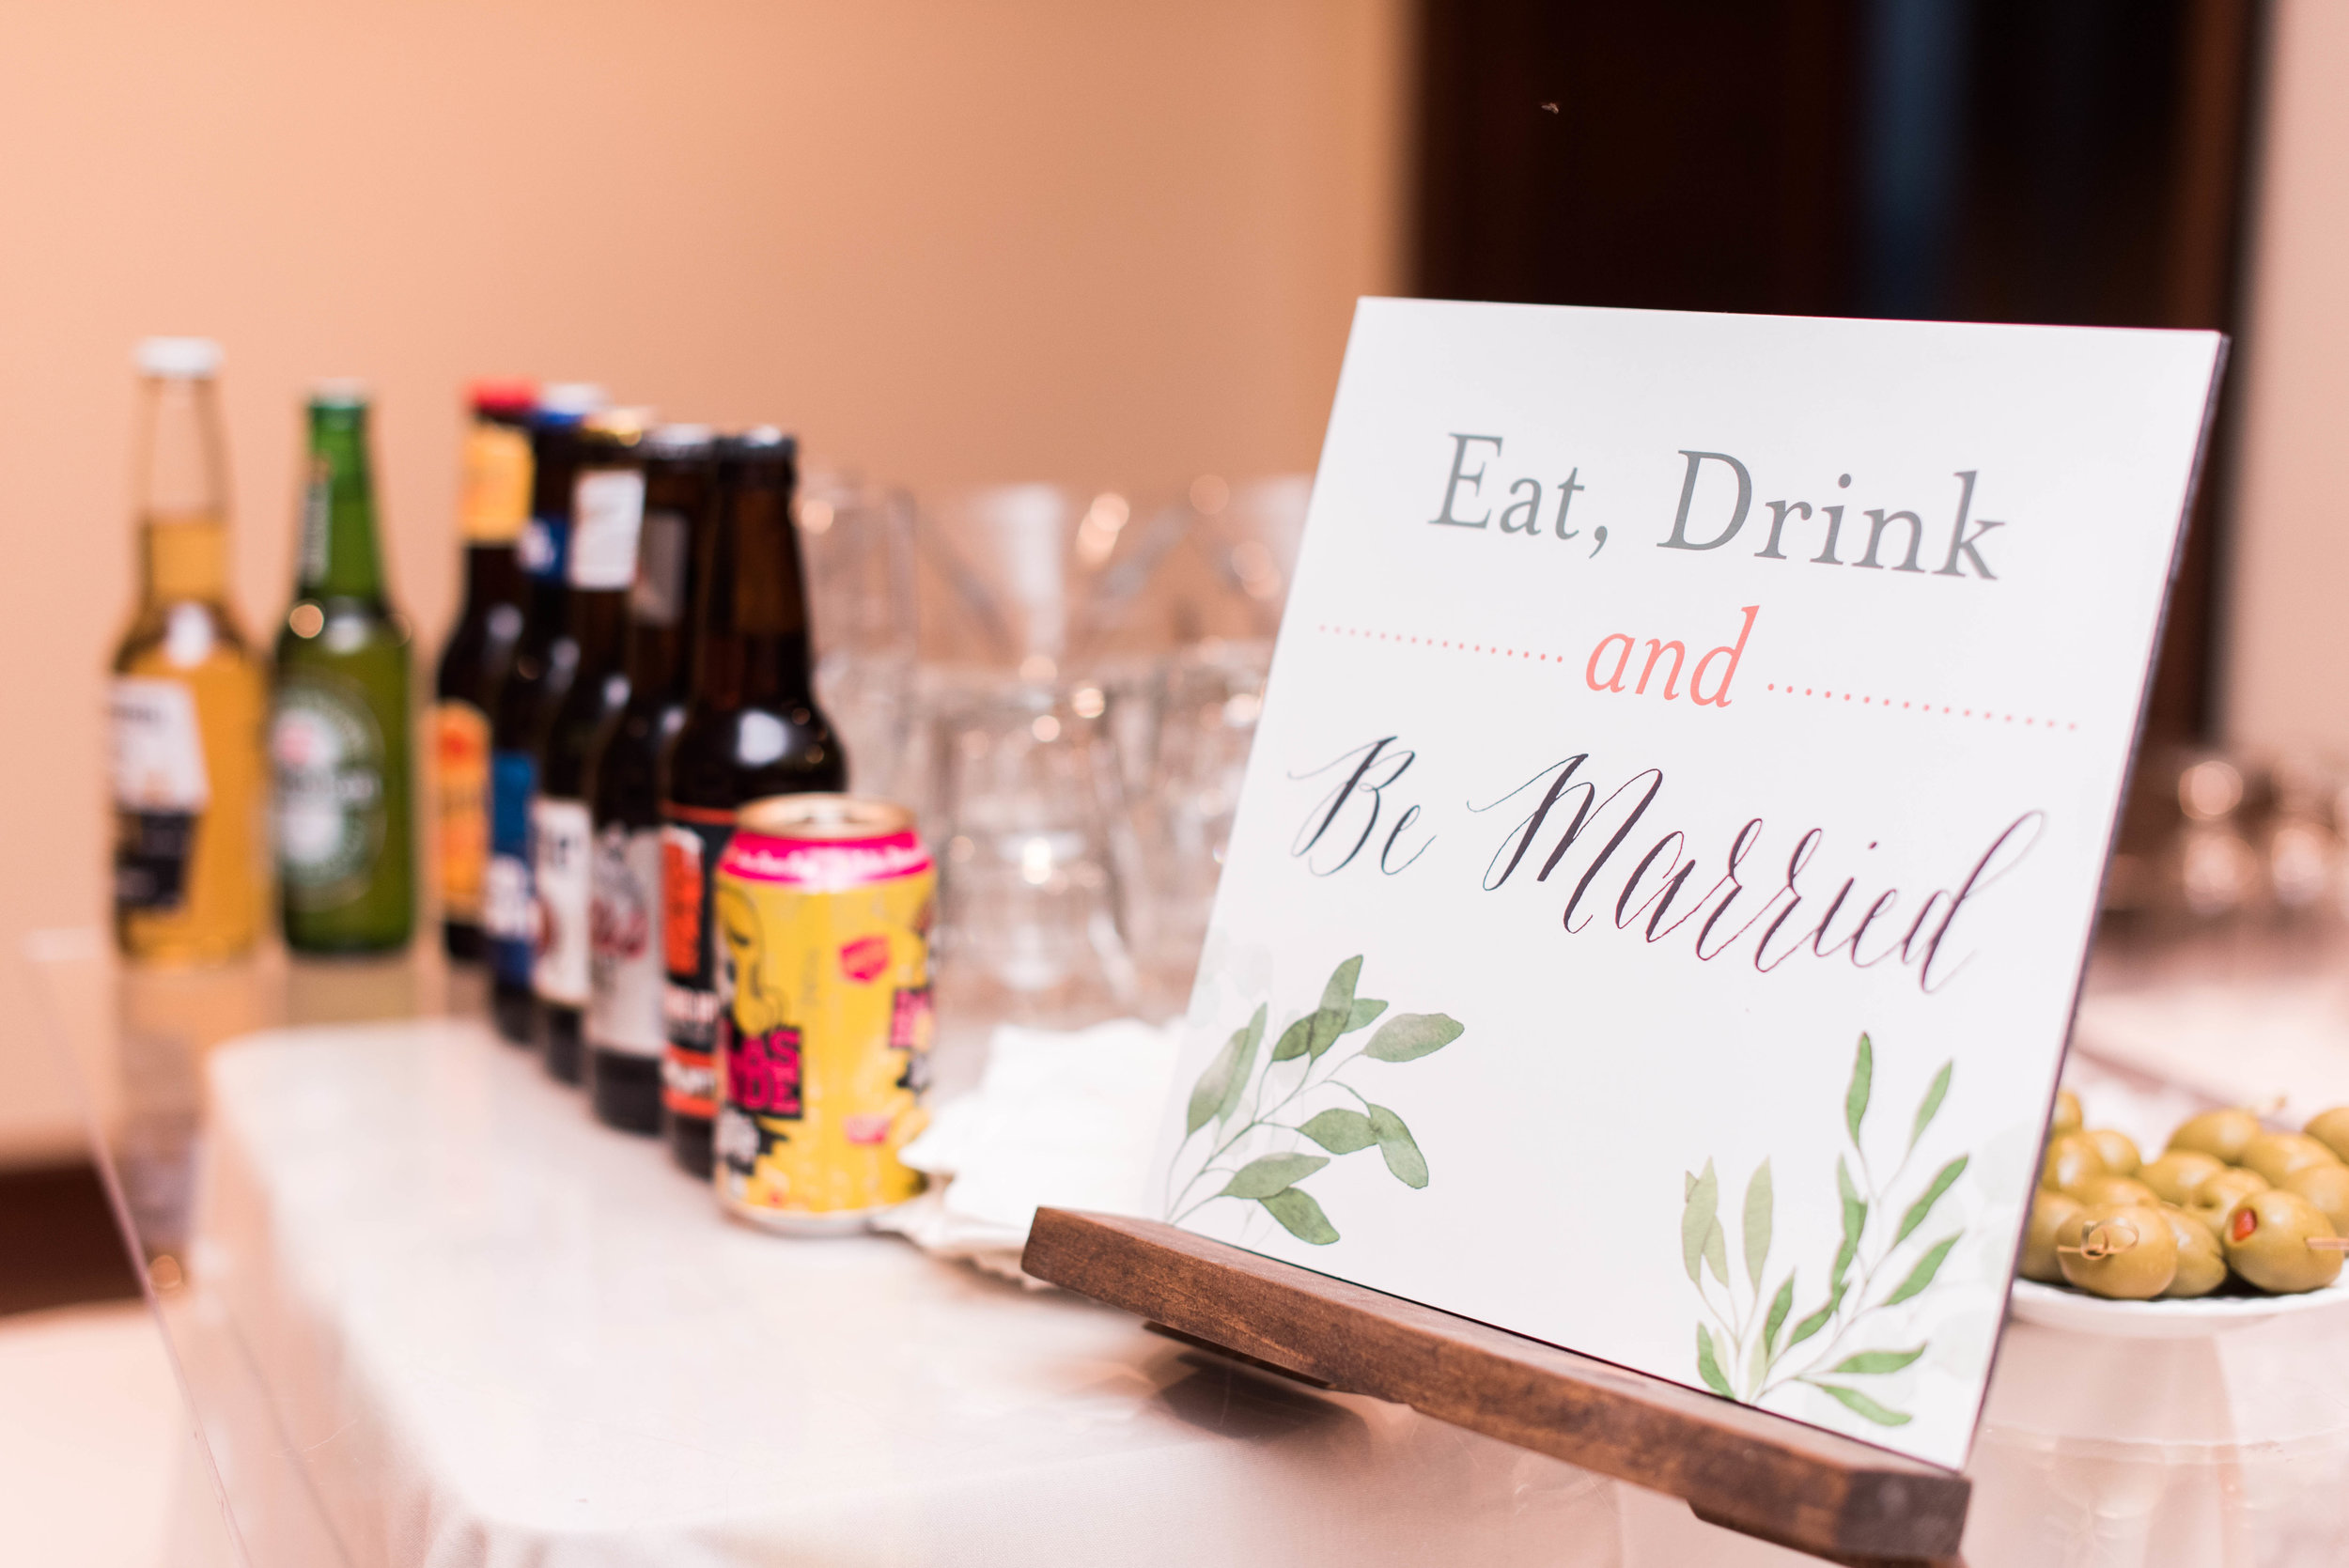  Before entering the ceremony hall, there was an open bar for guests. 